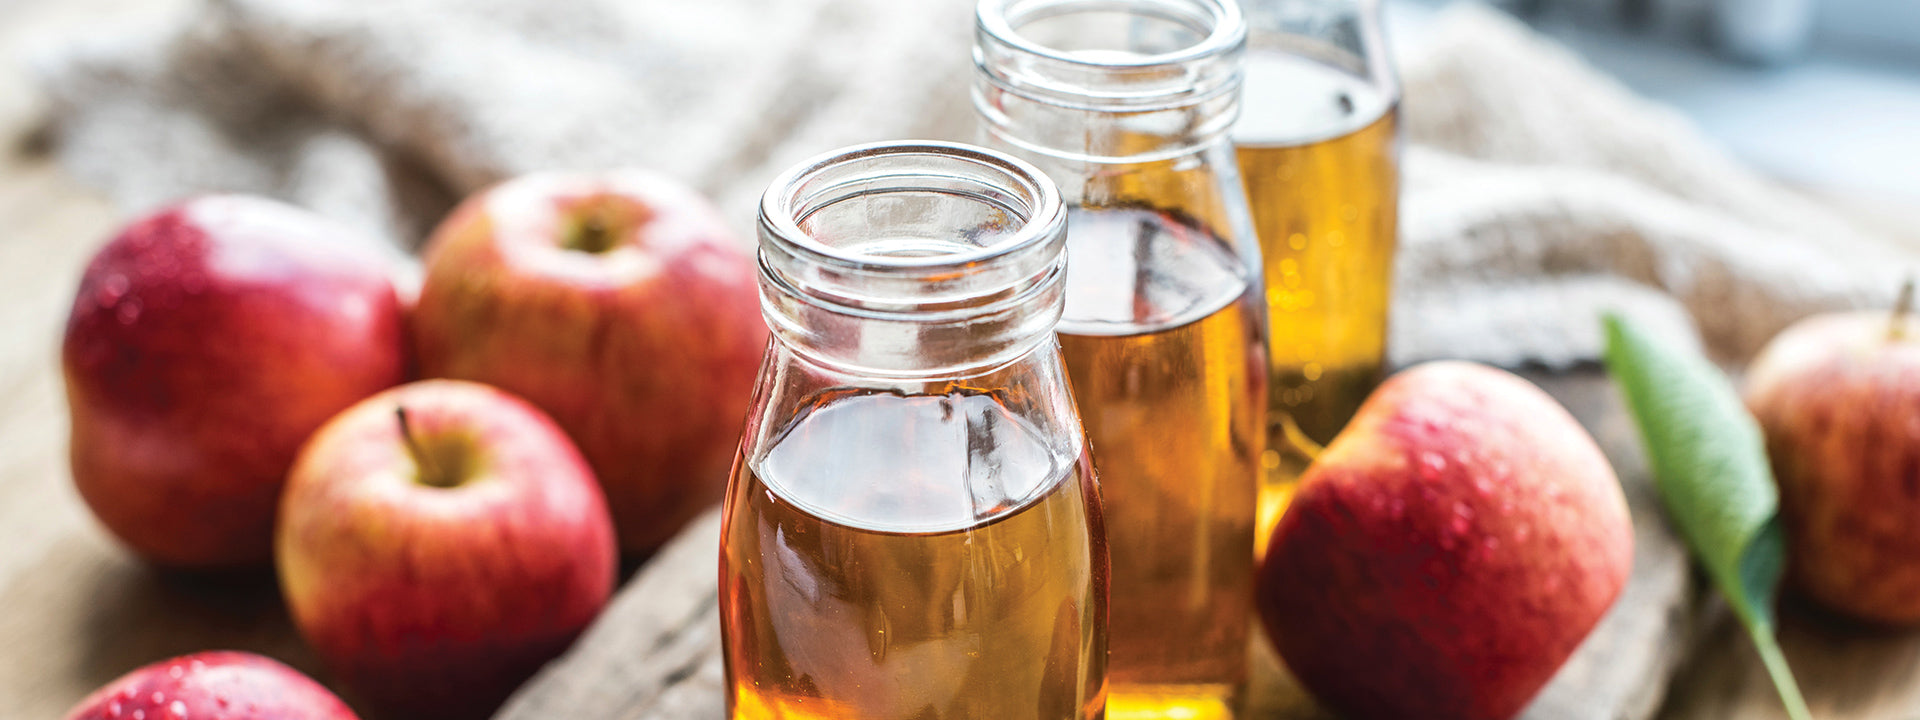 Does raw organic apple cider vinegar really have healing properties?